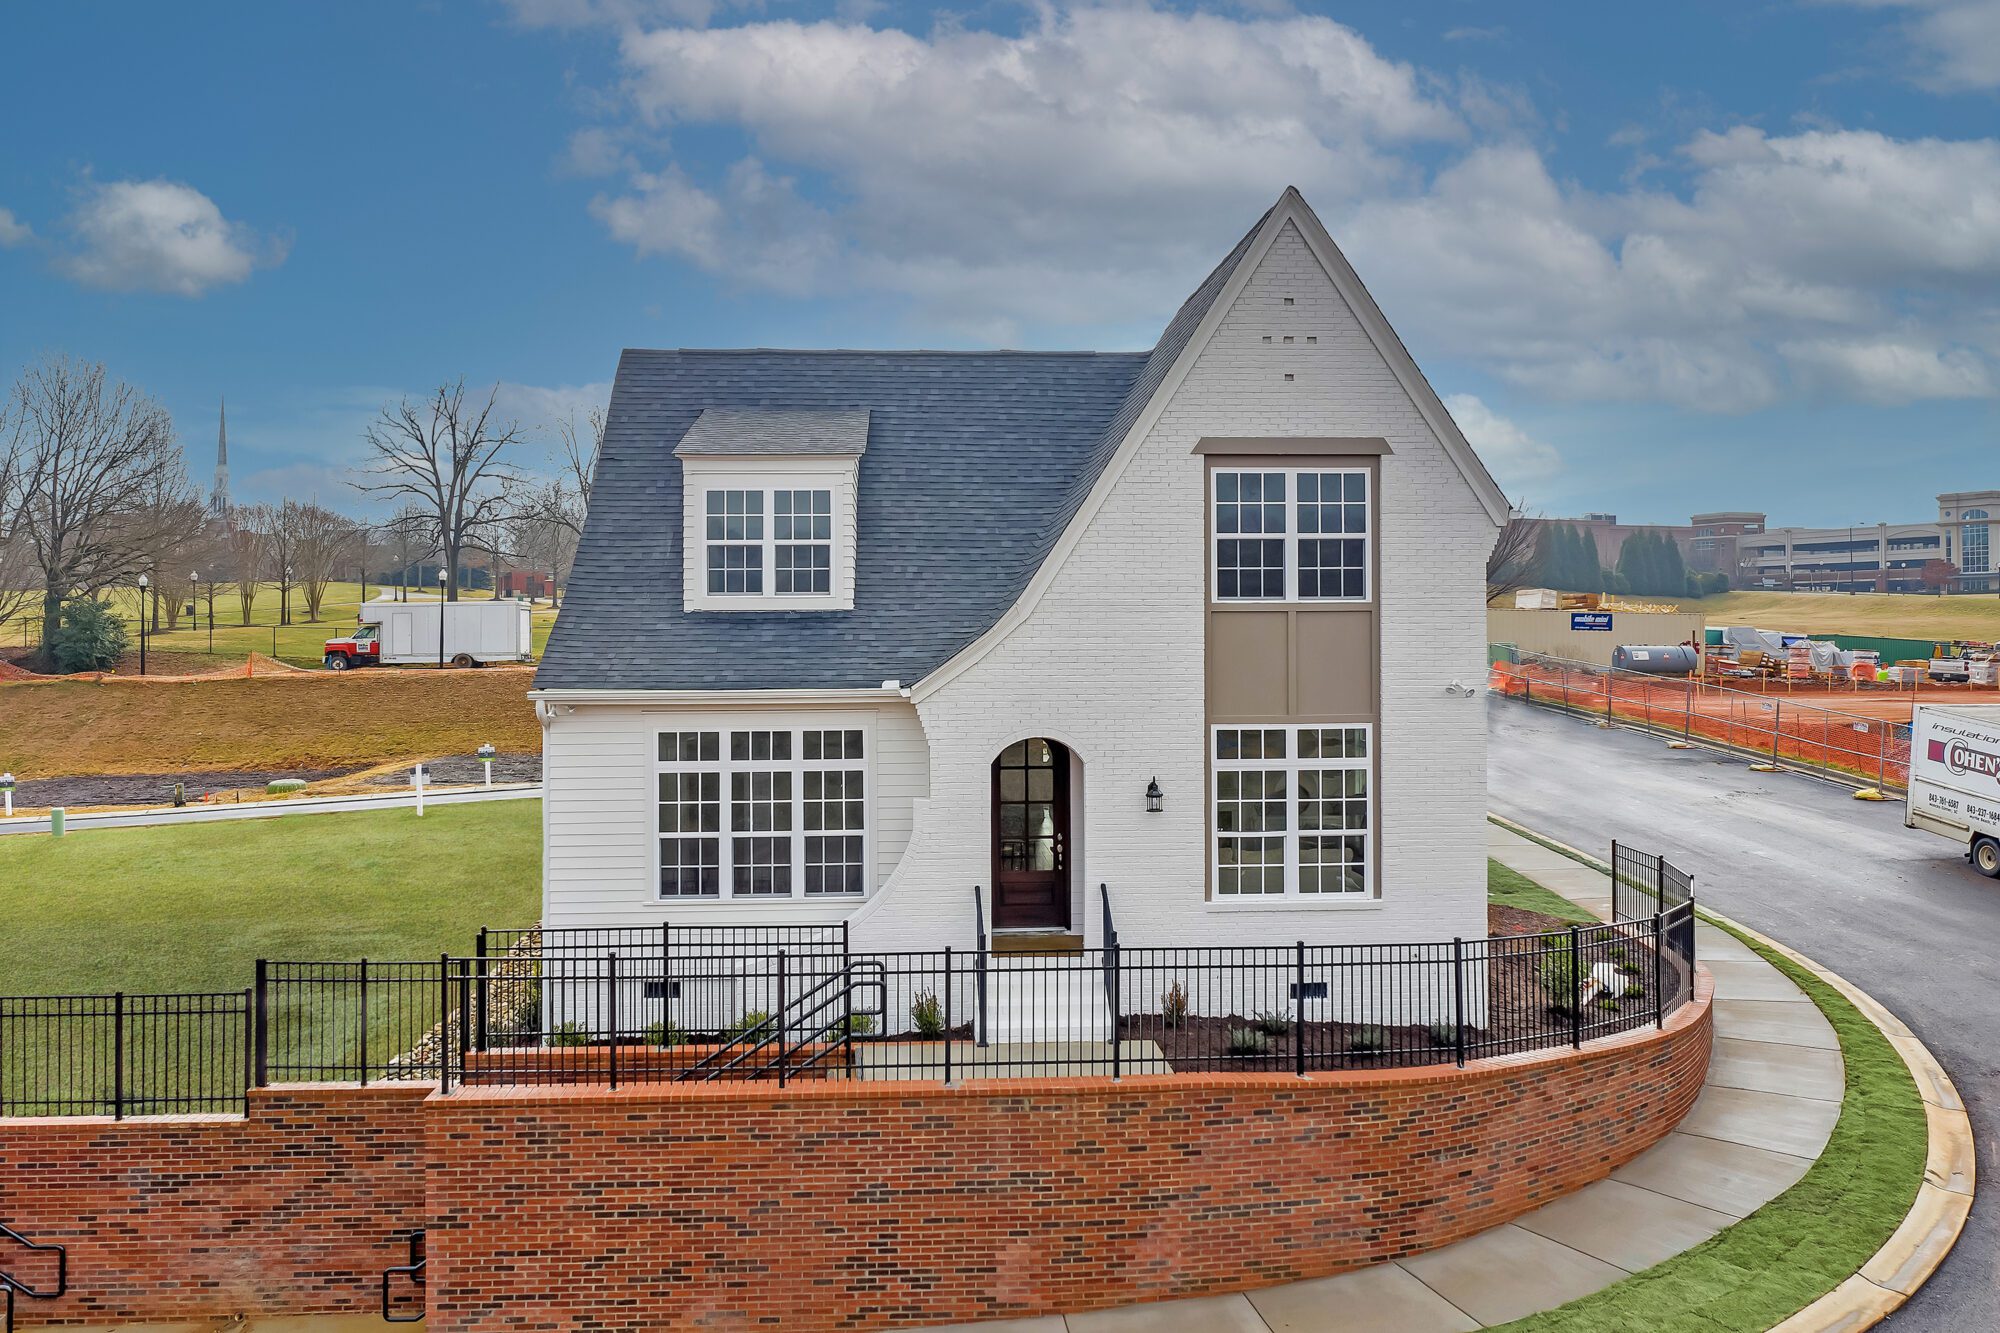 This Week, Realtor Preview & Open House at Silver Hill in Downtown Spartanburg